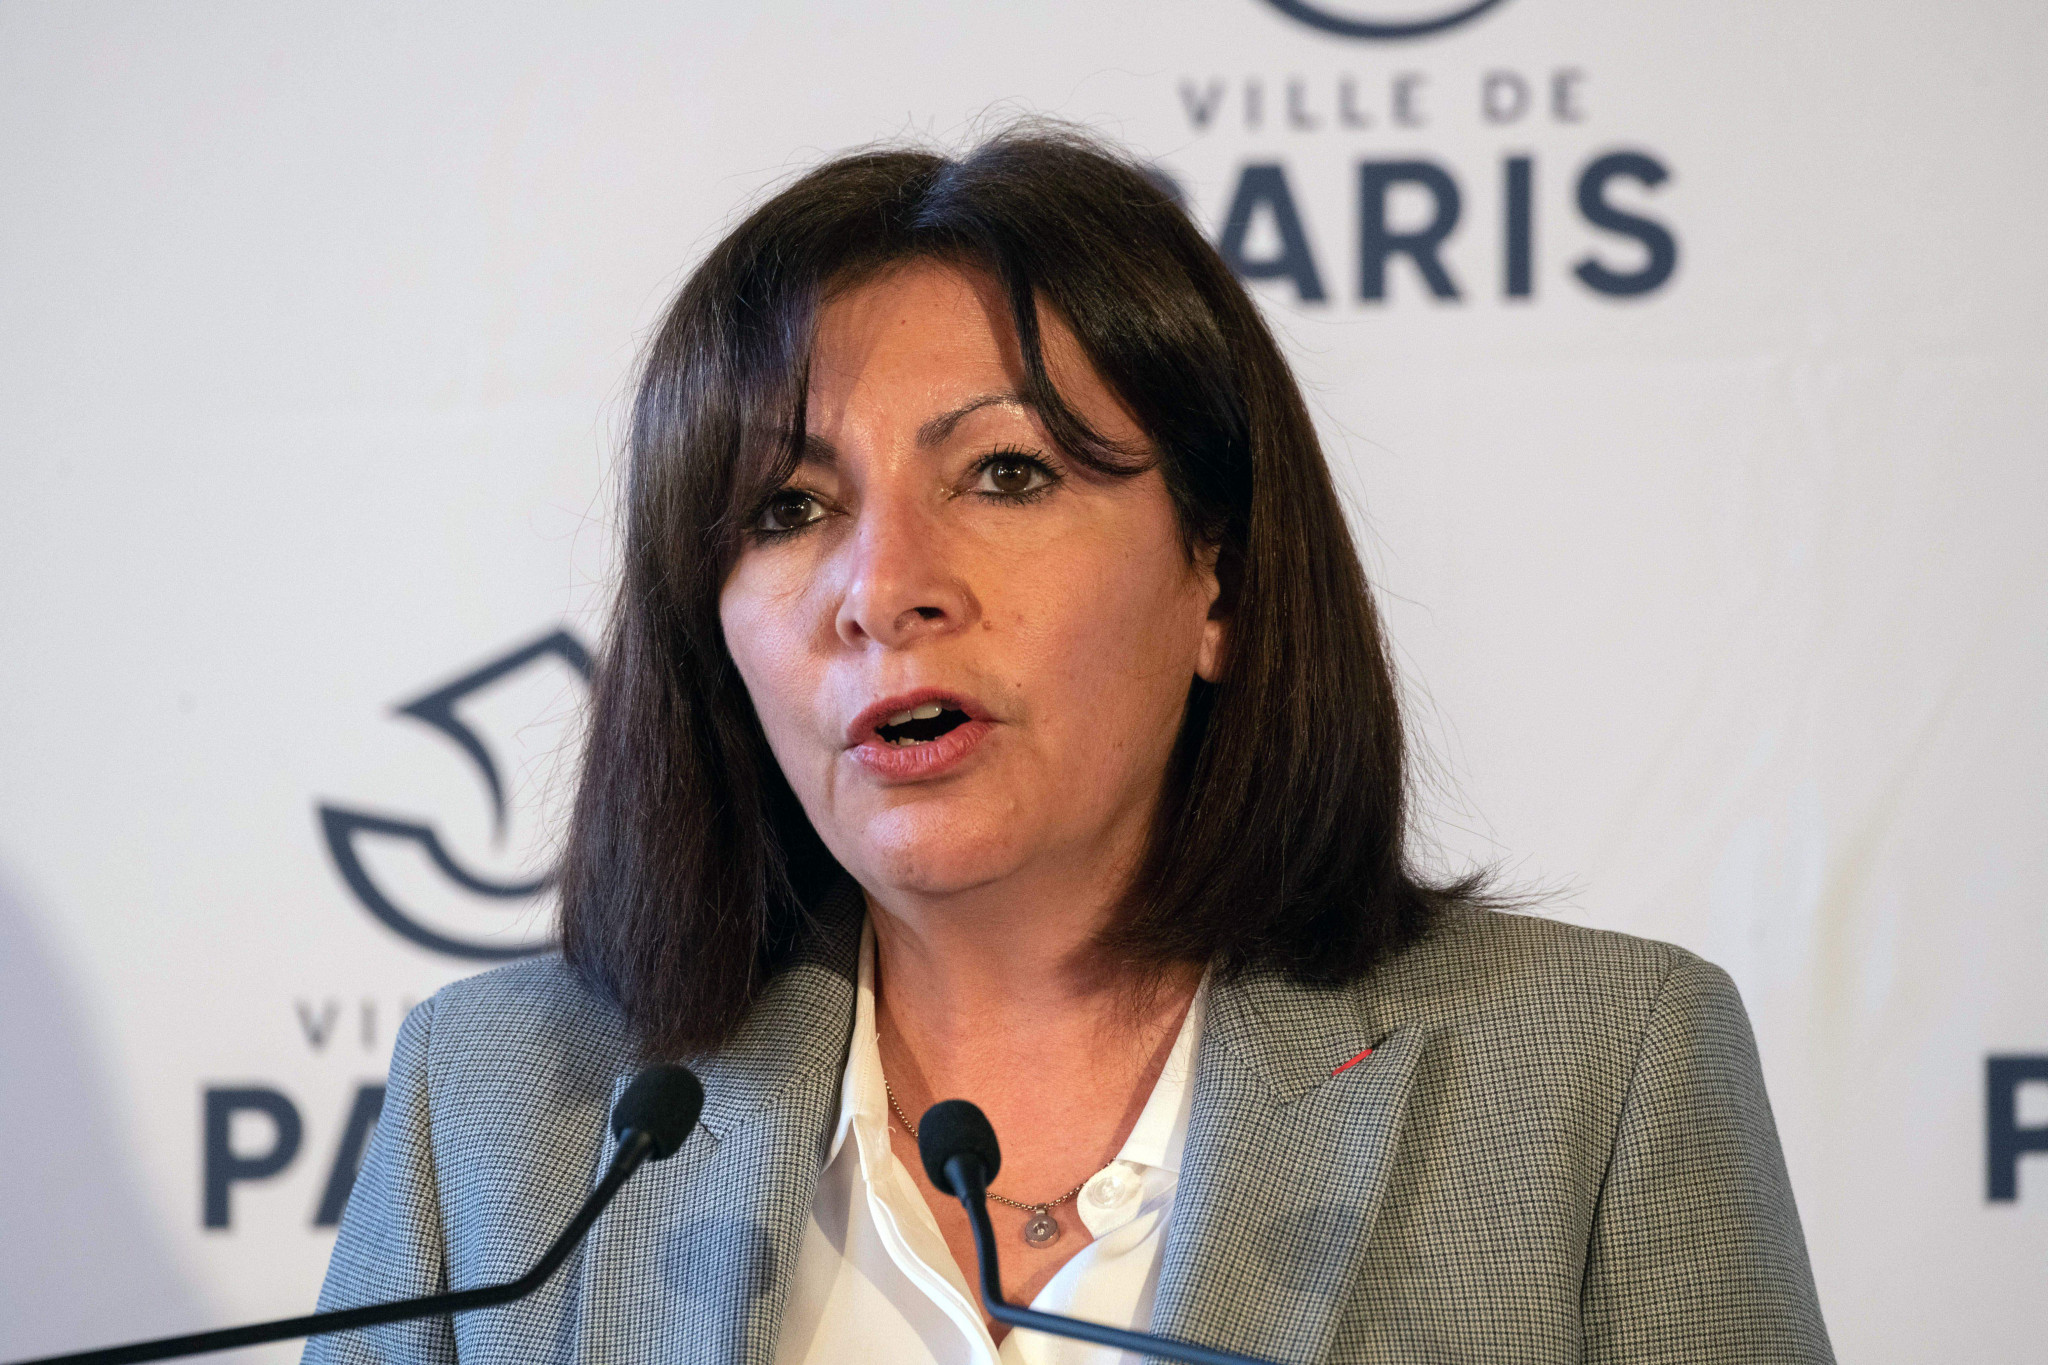 Hidalgo says Paris 2024 remains on track despite challenges of COVID-19